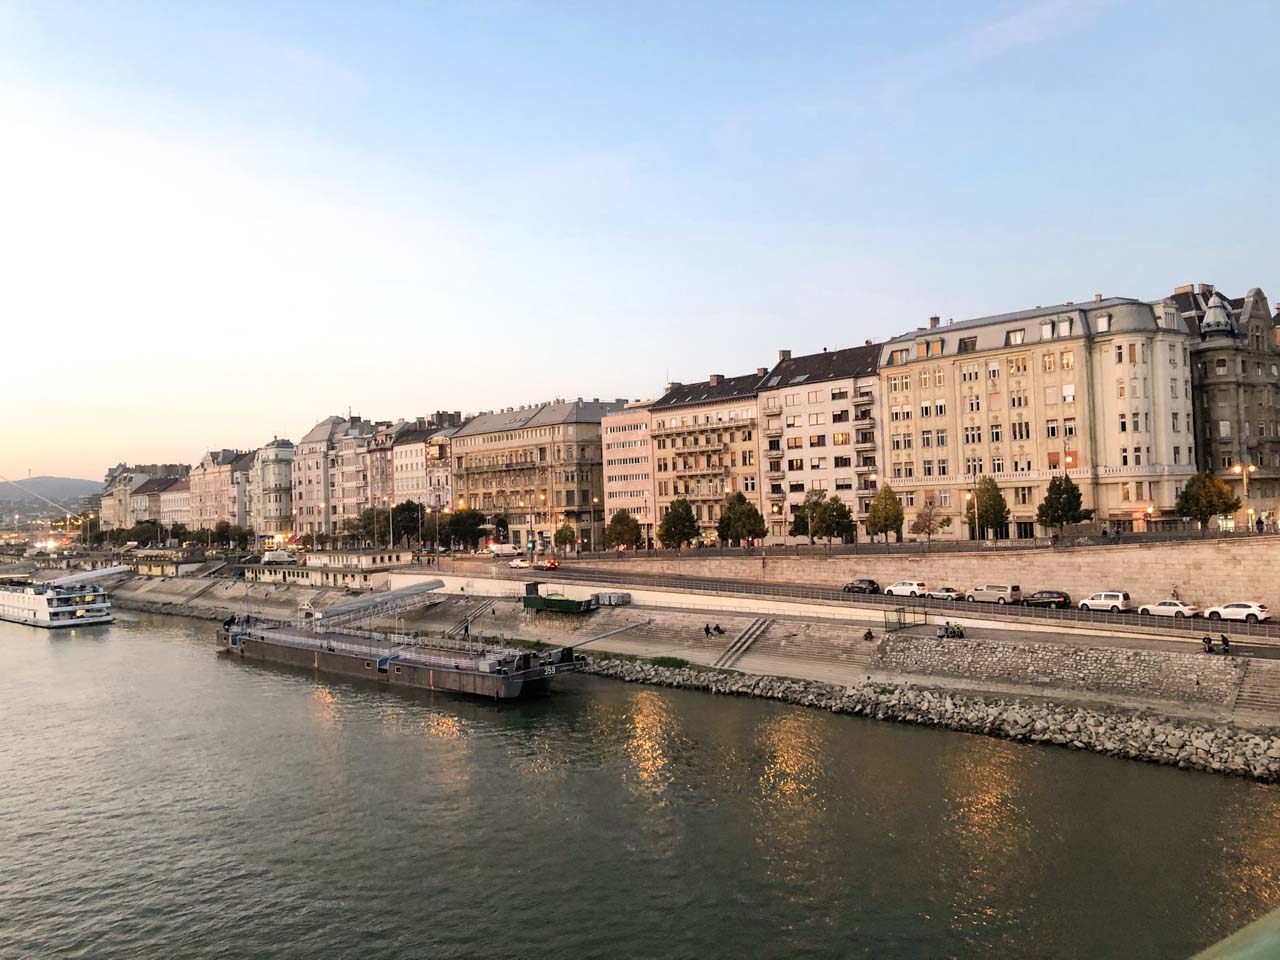 Buildings on the bank of the Danube River in Budapest